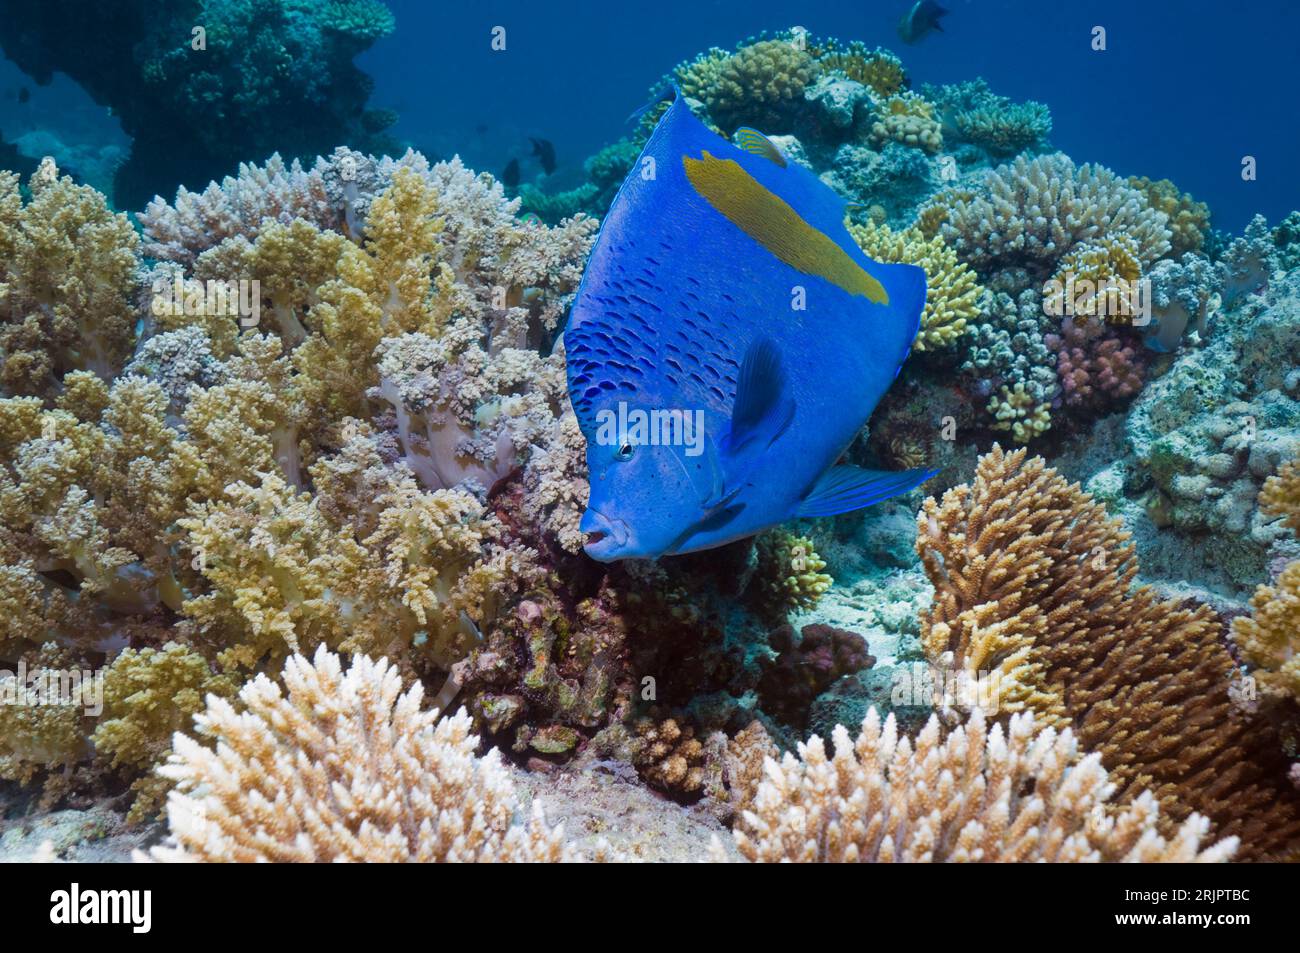 Yellowbar angelfish (Pomacanthus maculosus)  swimming over coral reef.  Egypt, Red Sea. Stock Photo